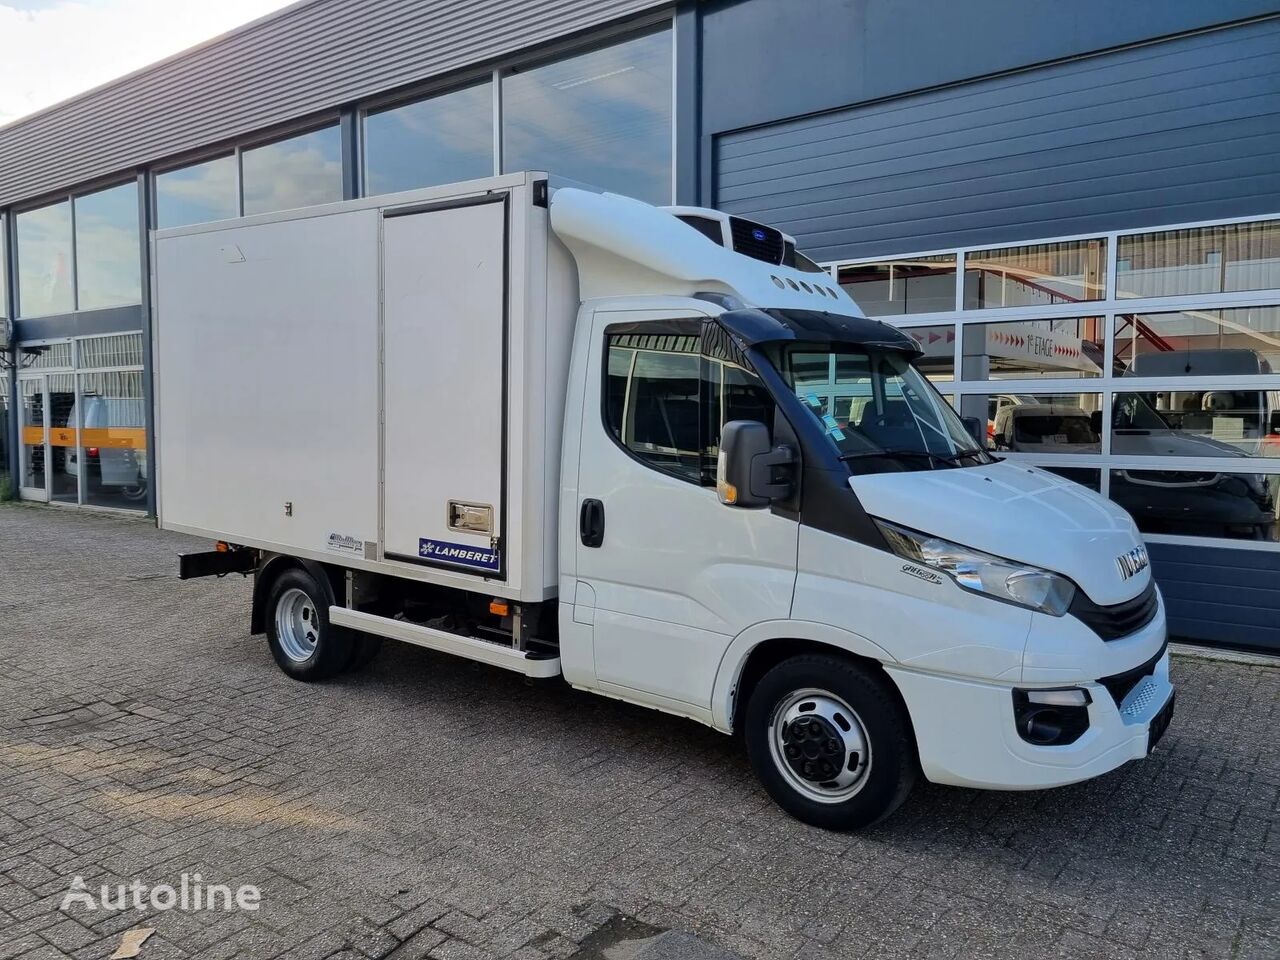 IVECO Daily 35C18 Kuhlkoffer Carrier -25C/+25C Multitemp Euro 6 refrigerated truck < 3.5t